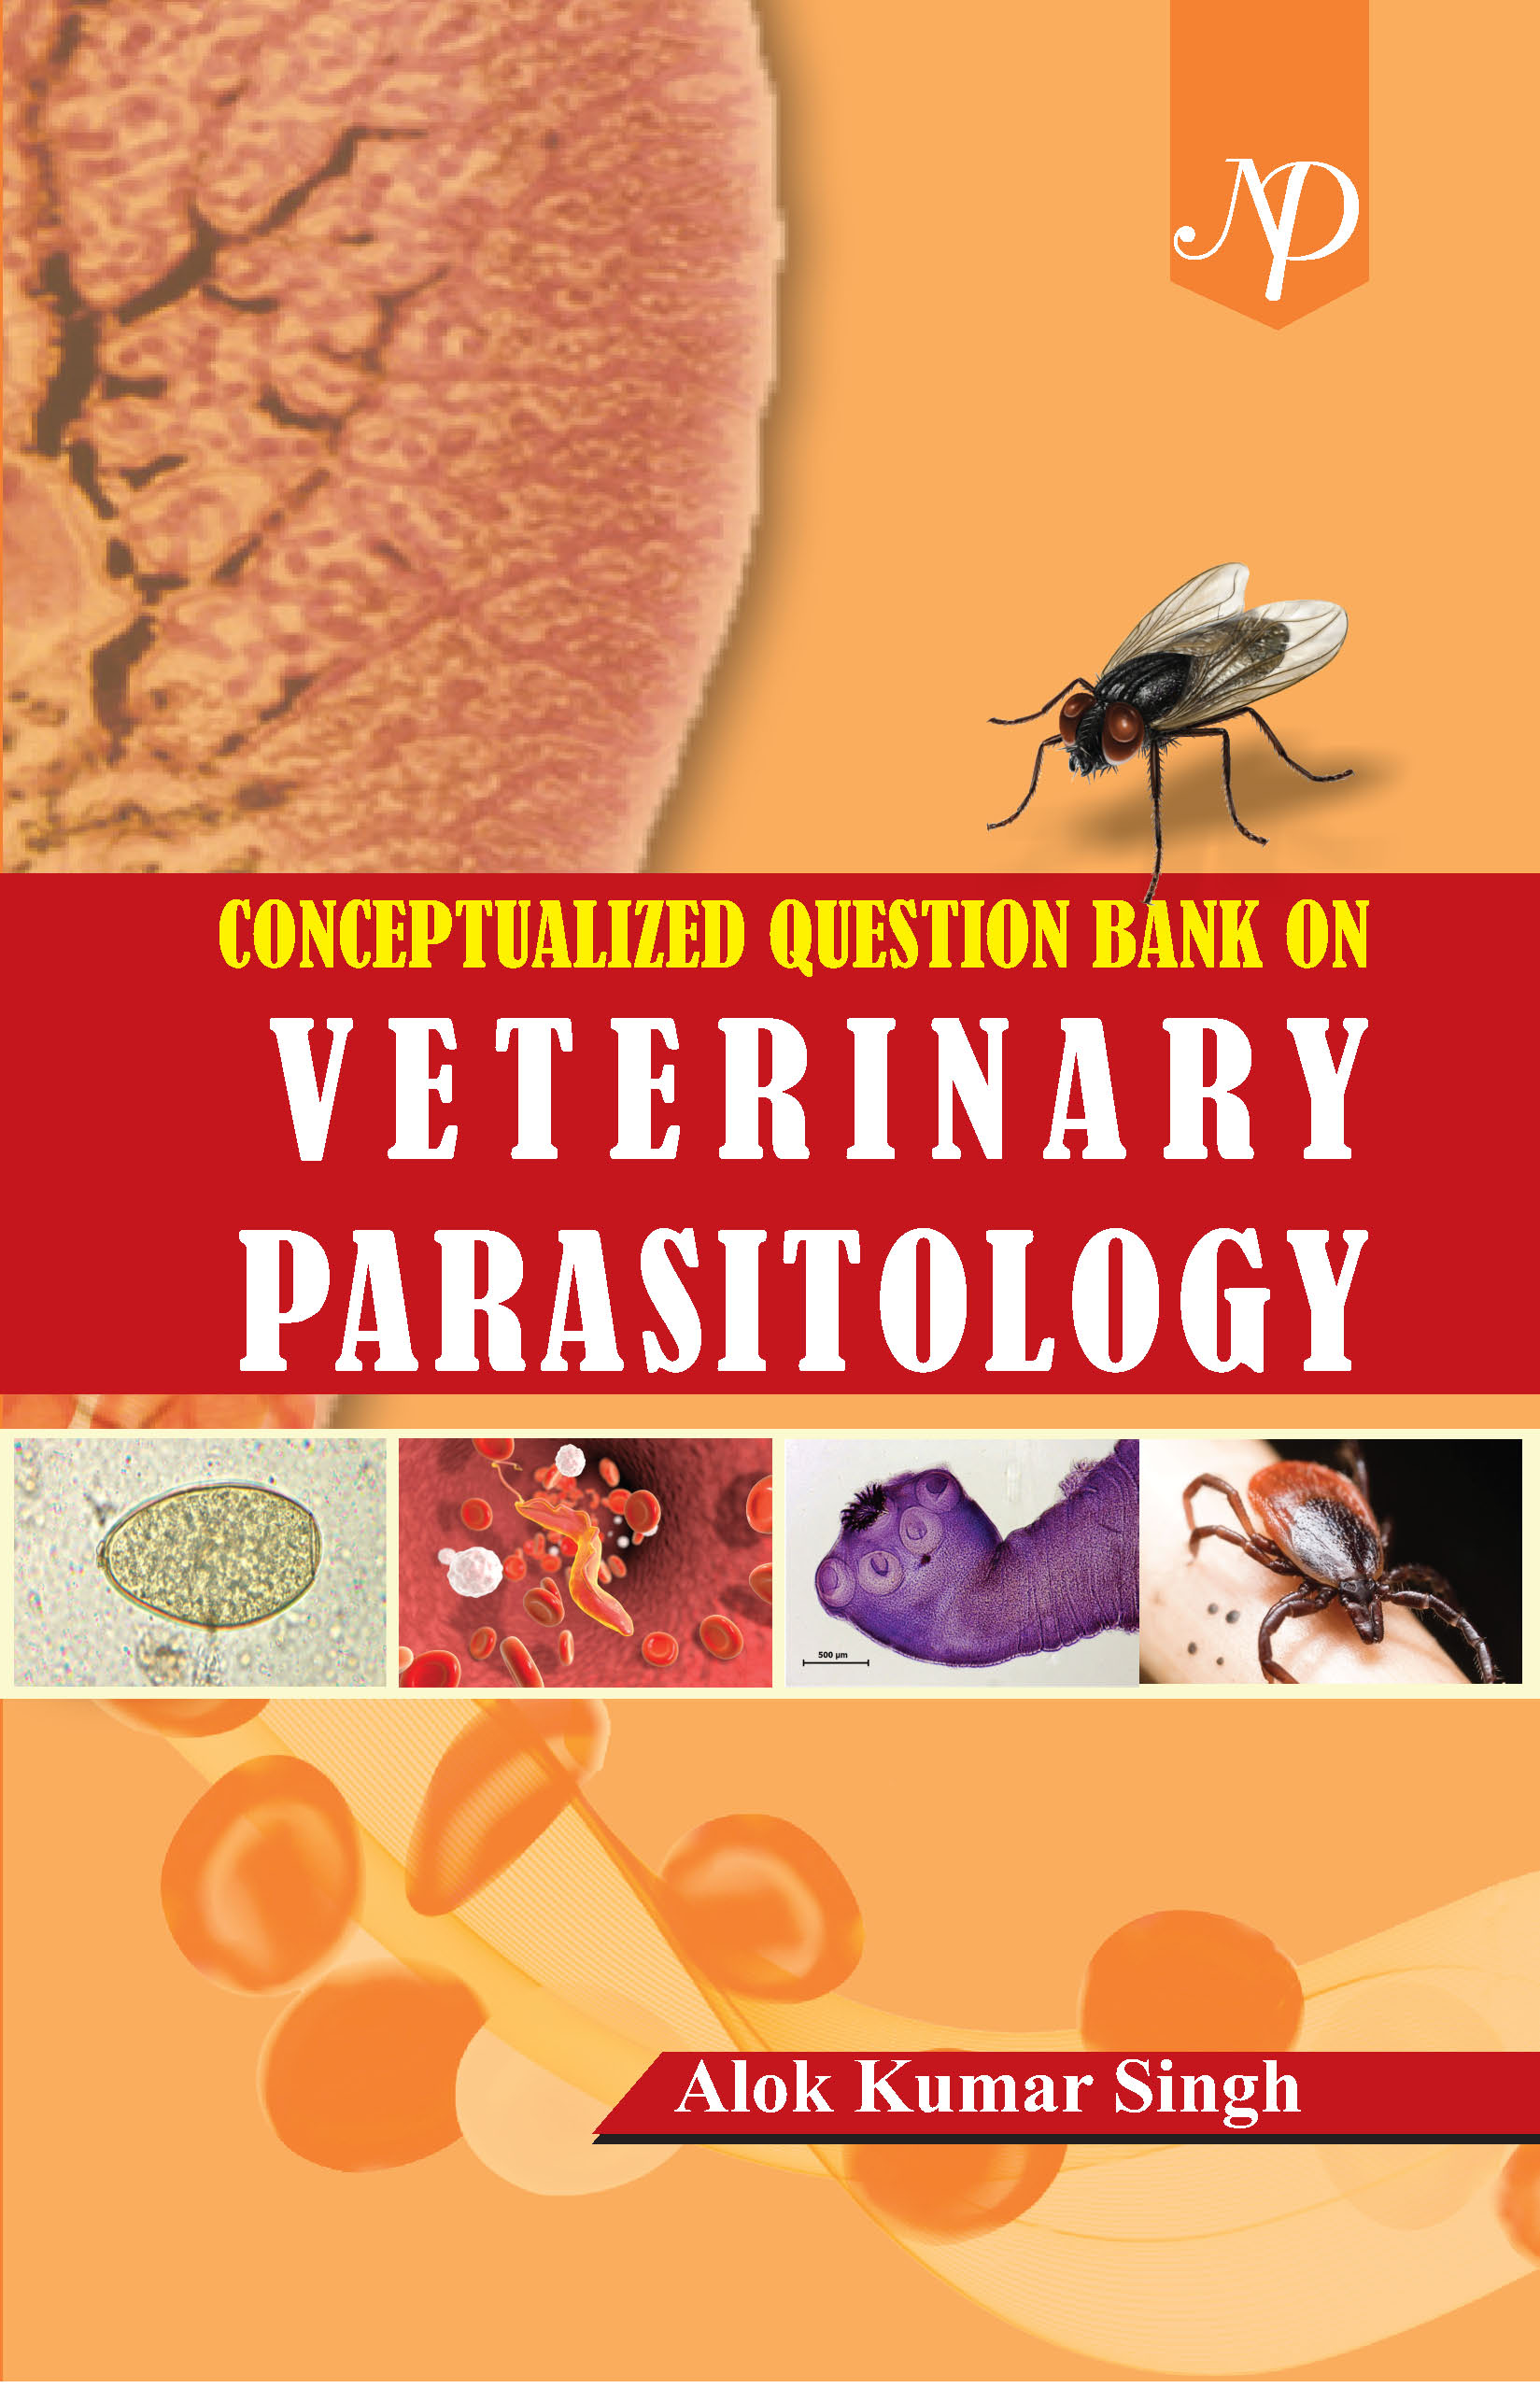 Conceptualized Question Bank on Veterinary Parasitology